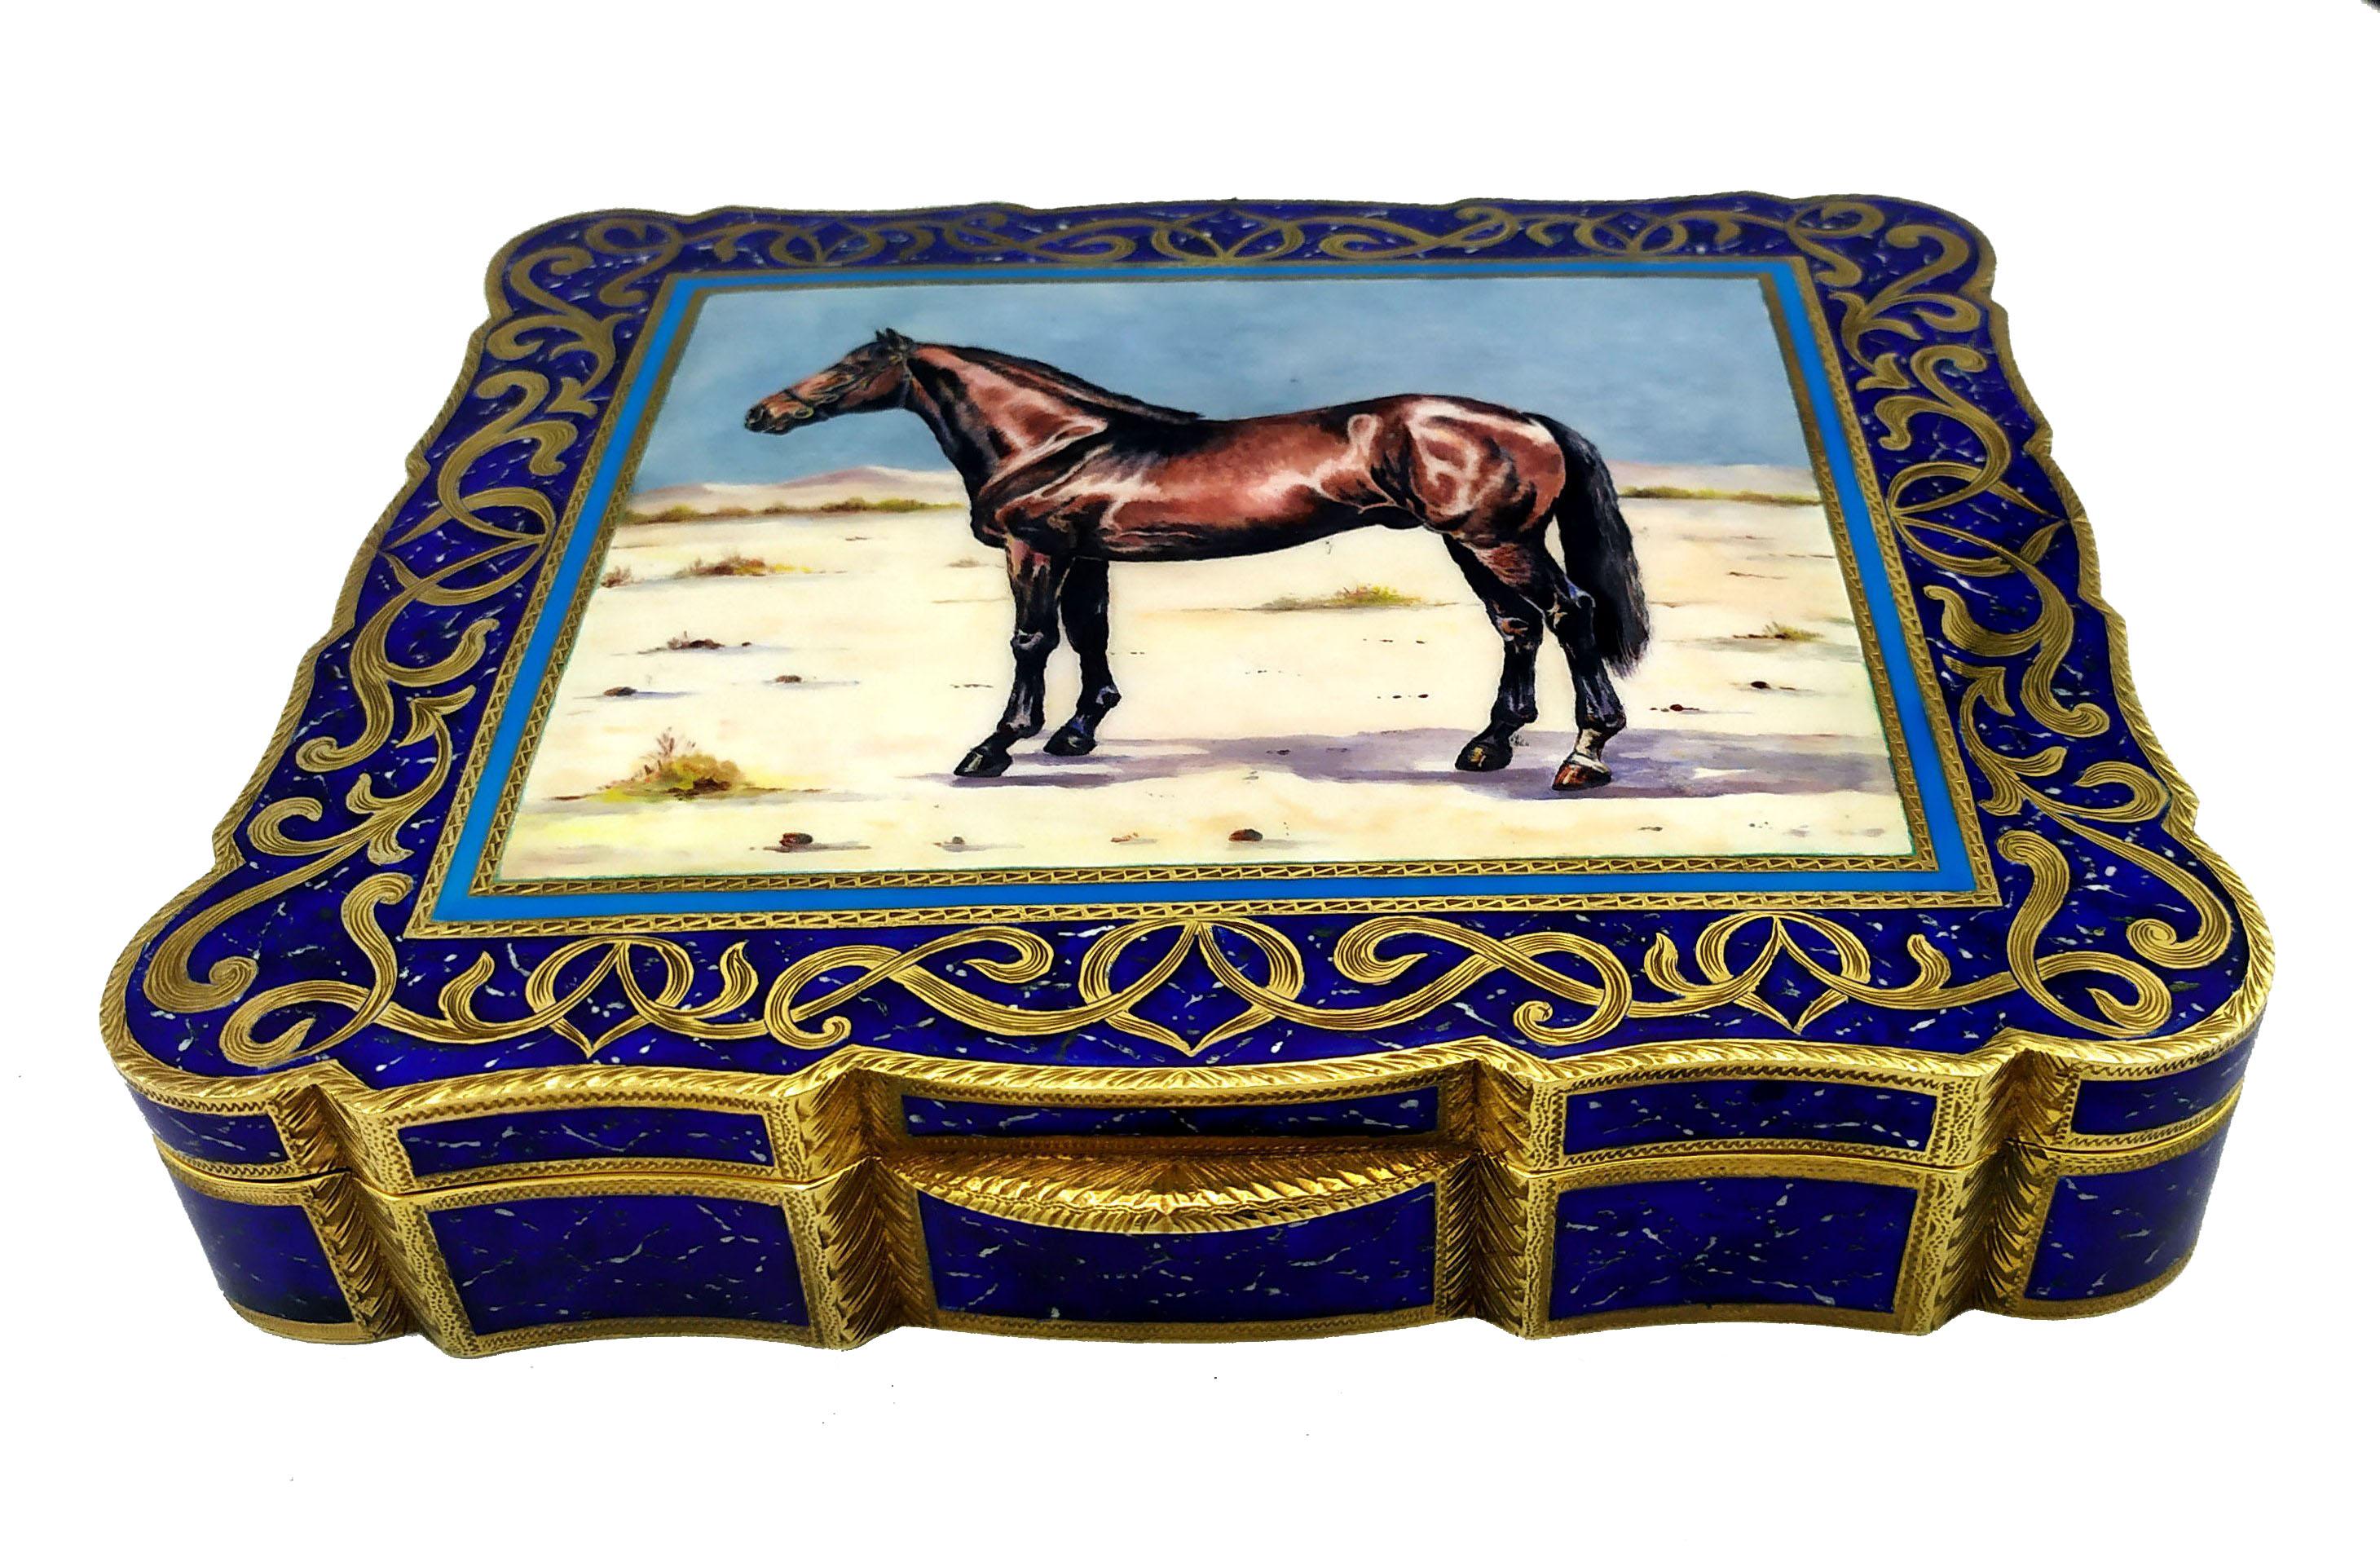 Shaped rectangular table box in 925/1000 sterling silver gold plated with fine hand-etched fire-enameled engraving painted like lapis lazuli stone and beautiful miniature hand-enameled and hand-painted by the painter Renato Dainelli depicting a